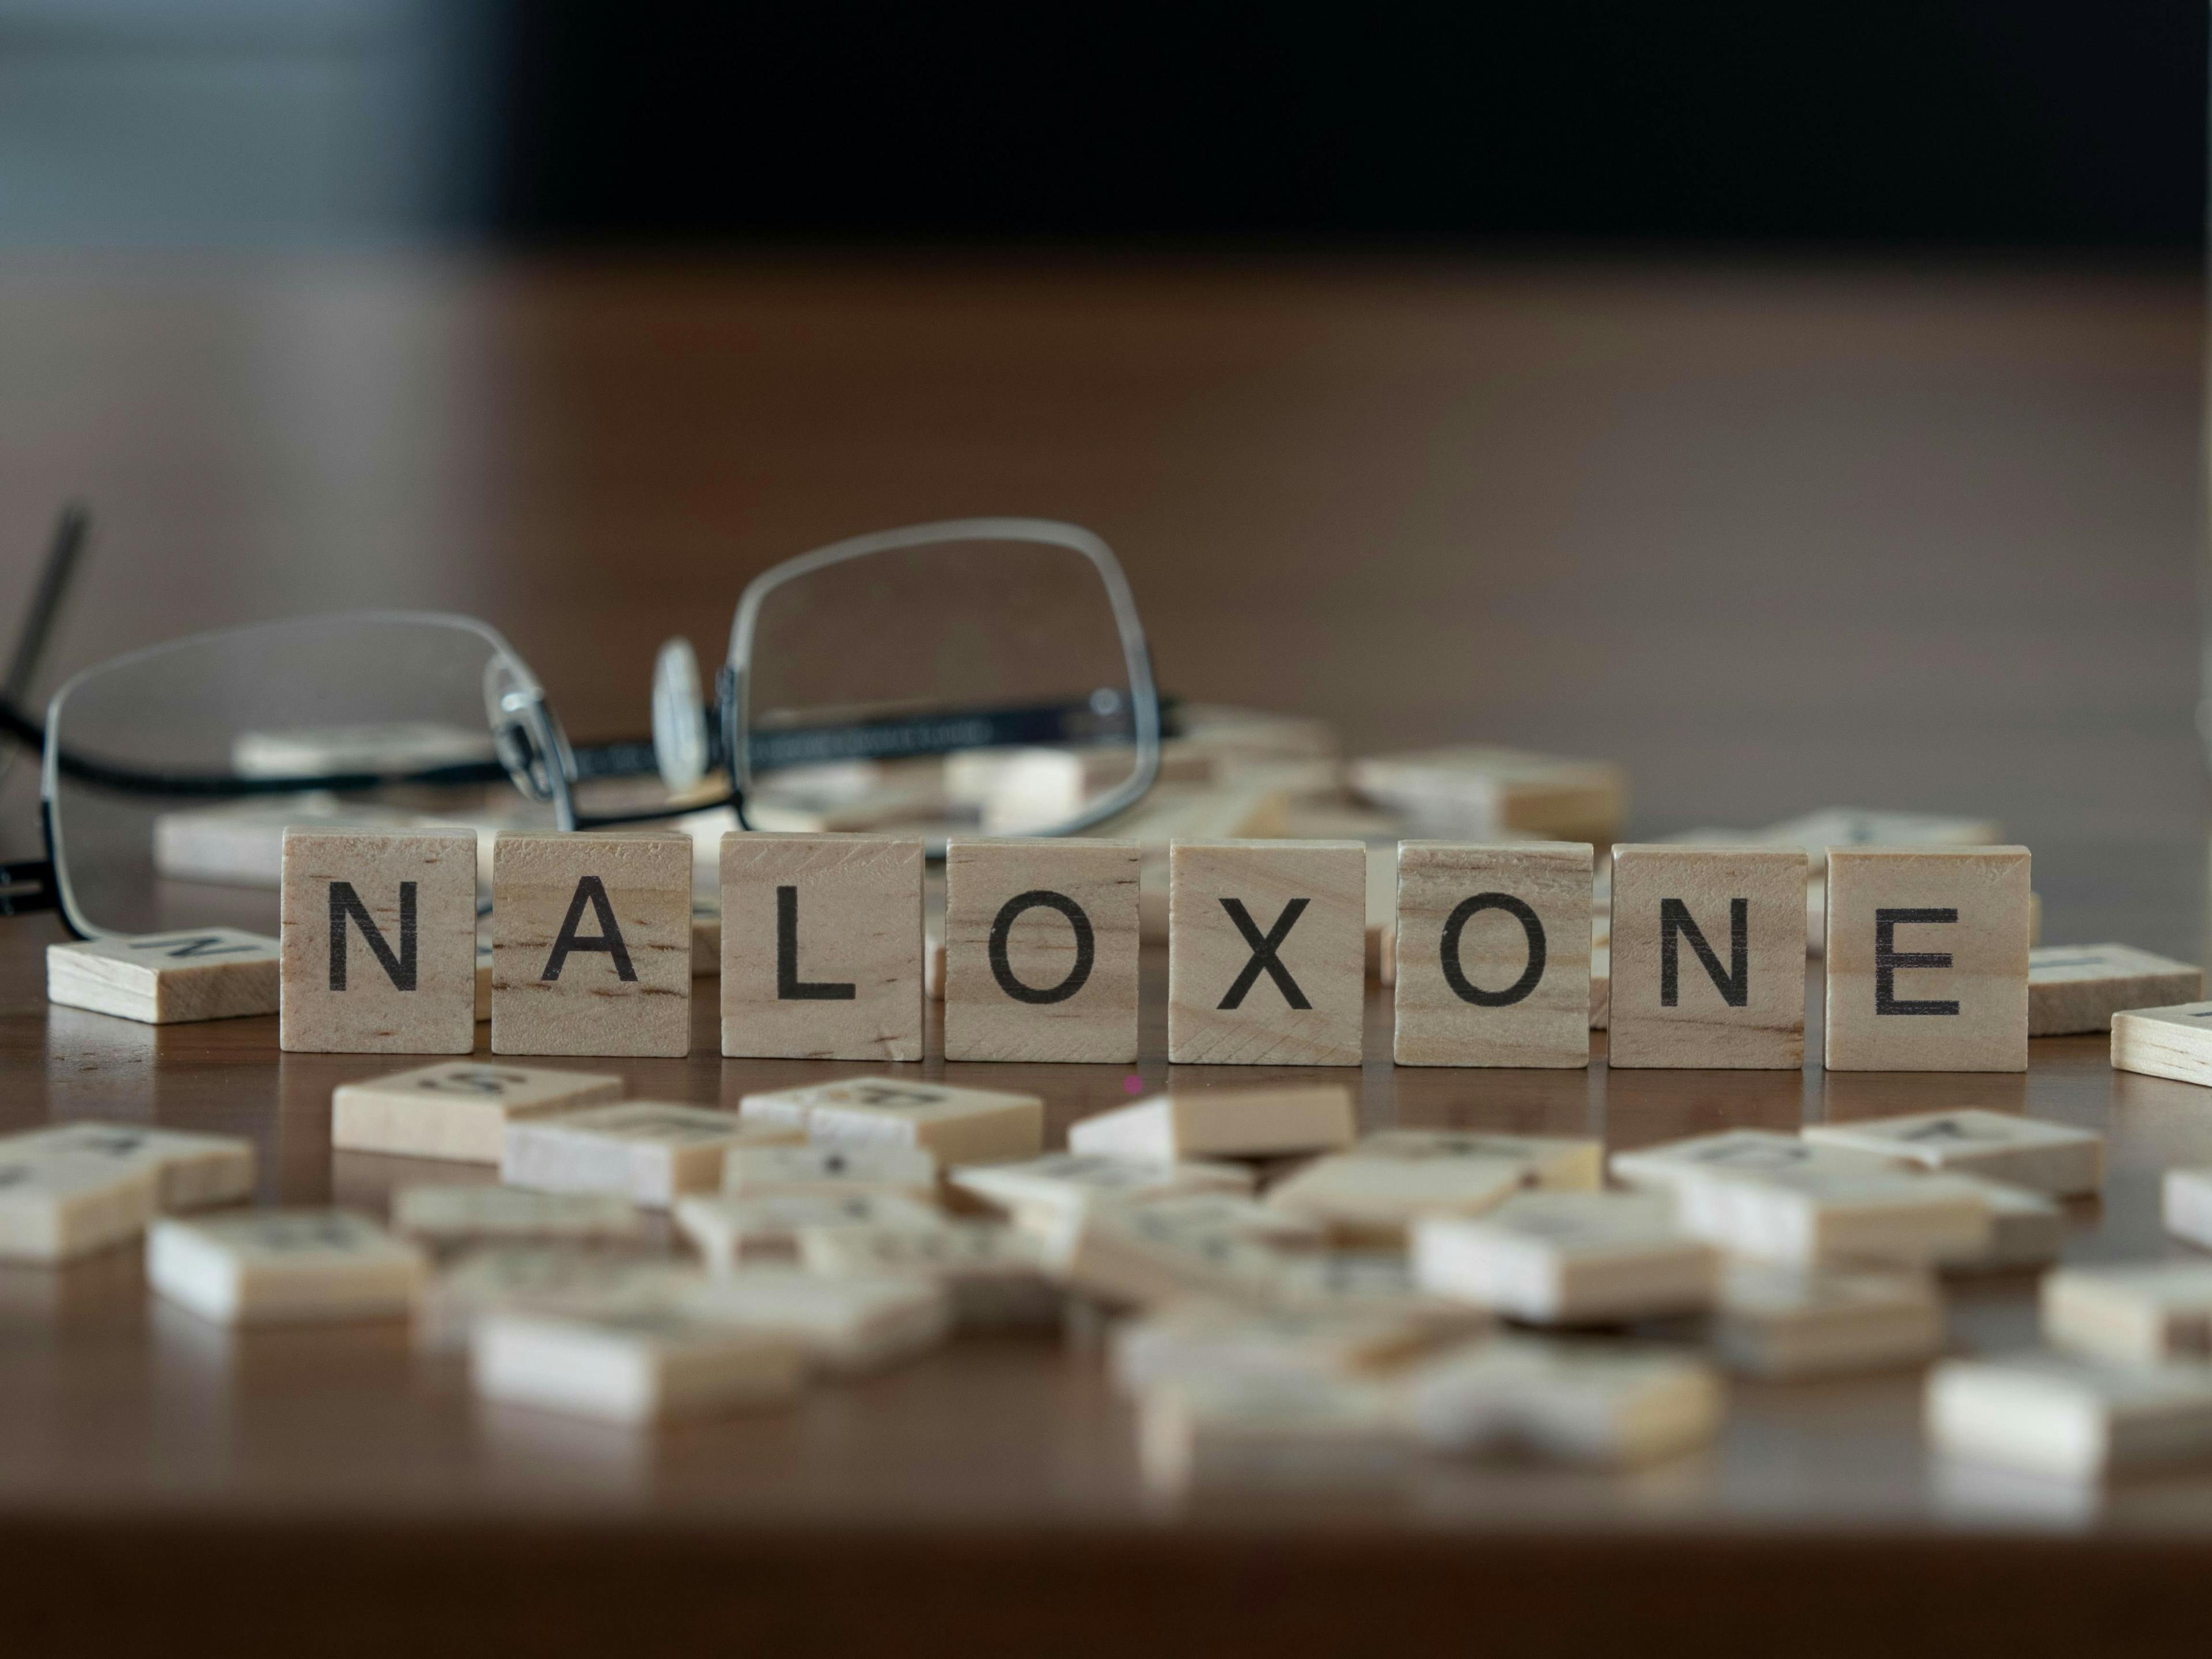 naloxone concept represented by wooden letter tiles | Image Credit: lexiconimages - stock.adobe.com